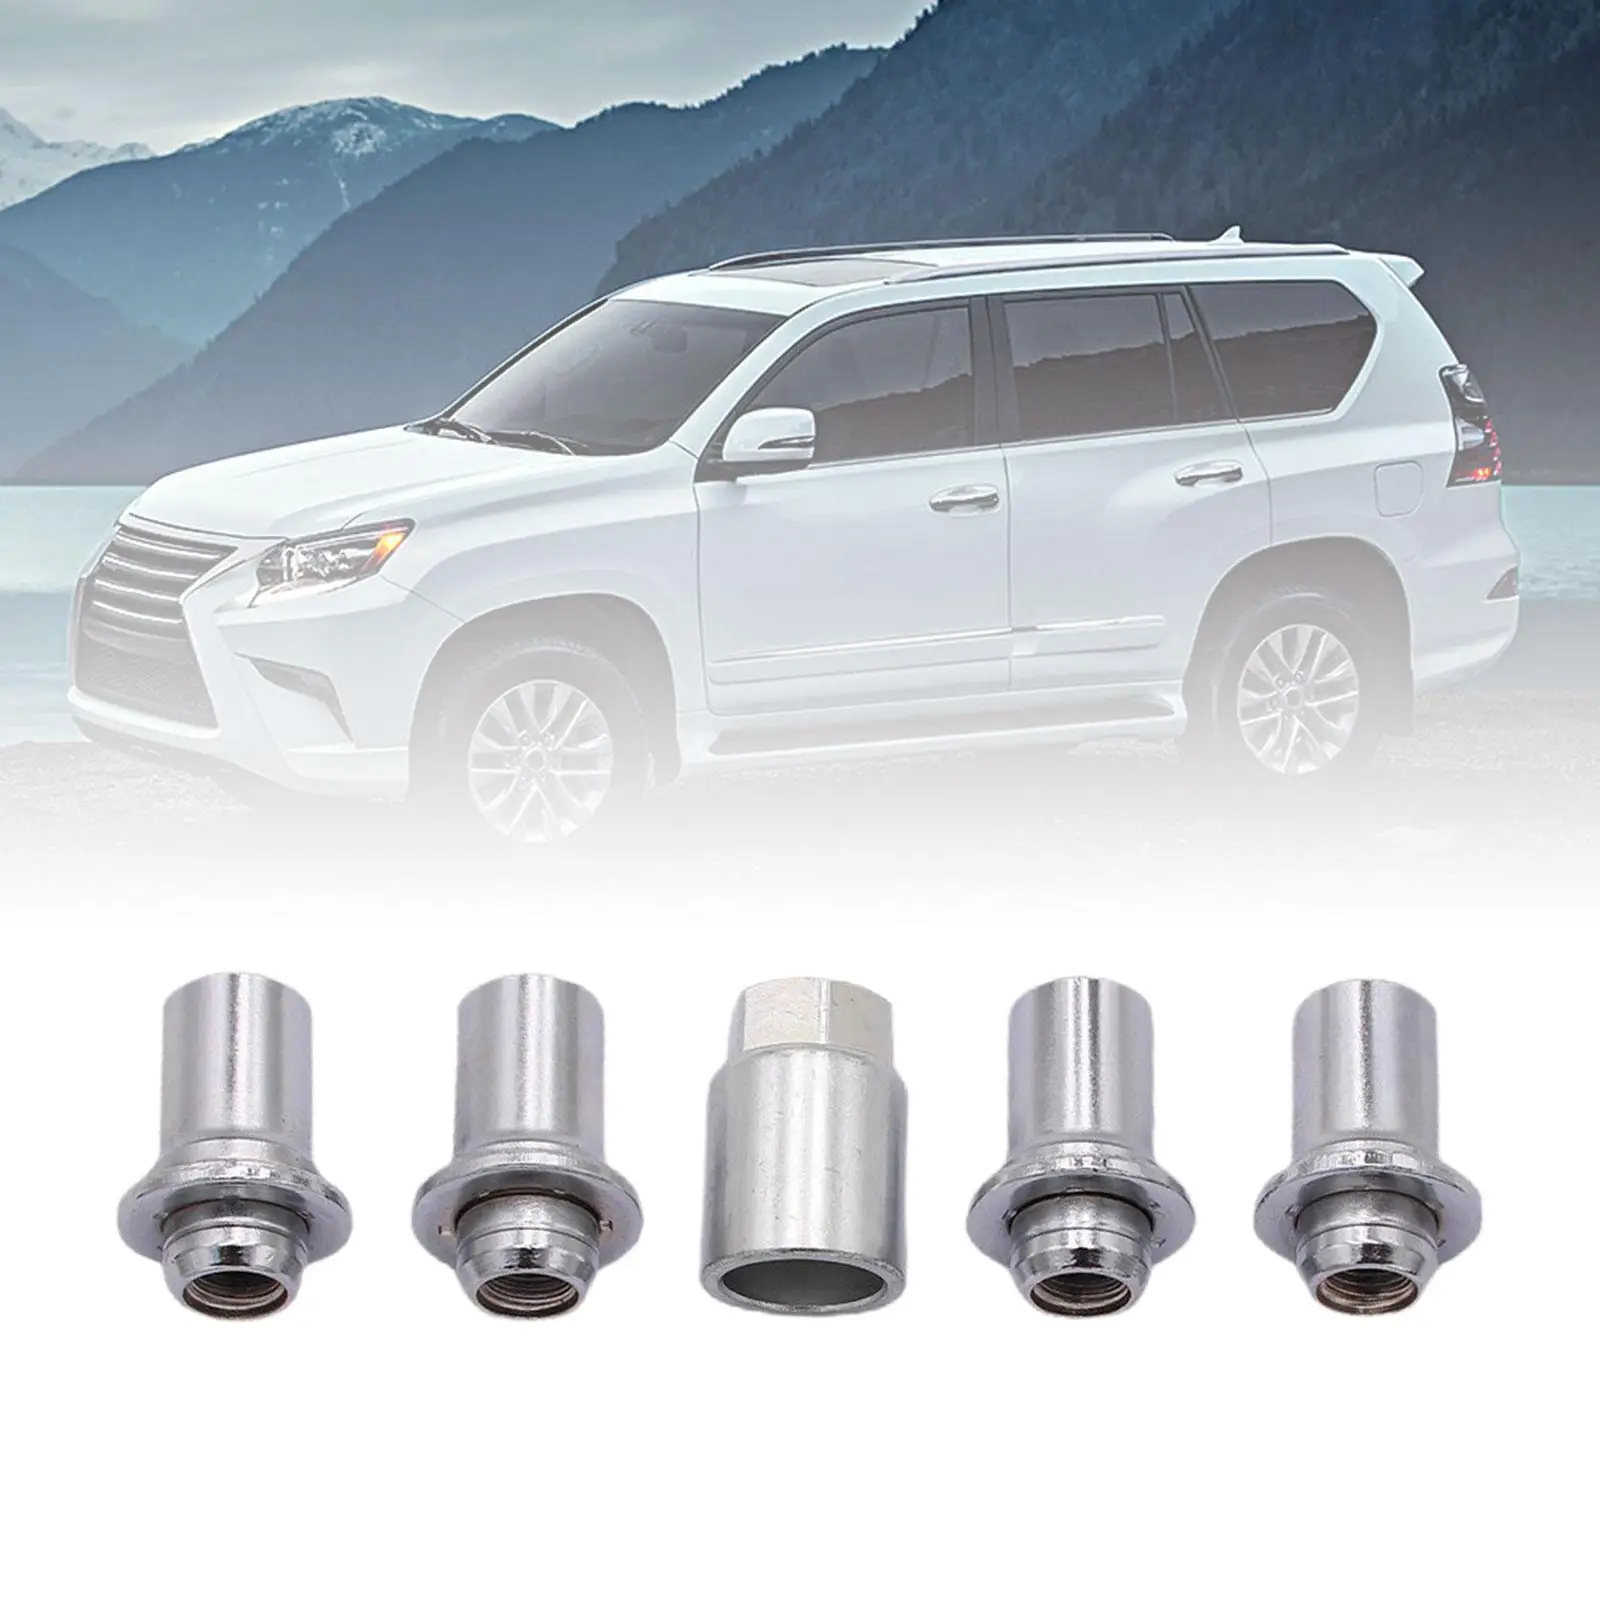 Metal Wheel Lock Set 00276-00901 Accessories Easy to Install Professional Direct Replaces Durable for Lexus Gx470 2003-2009